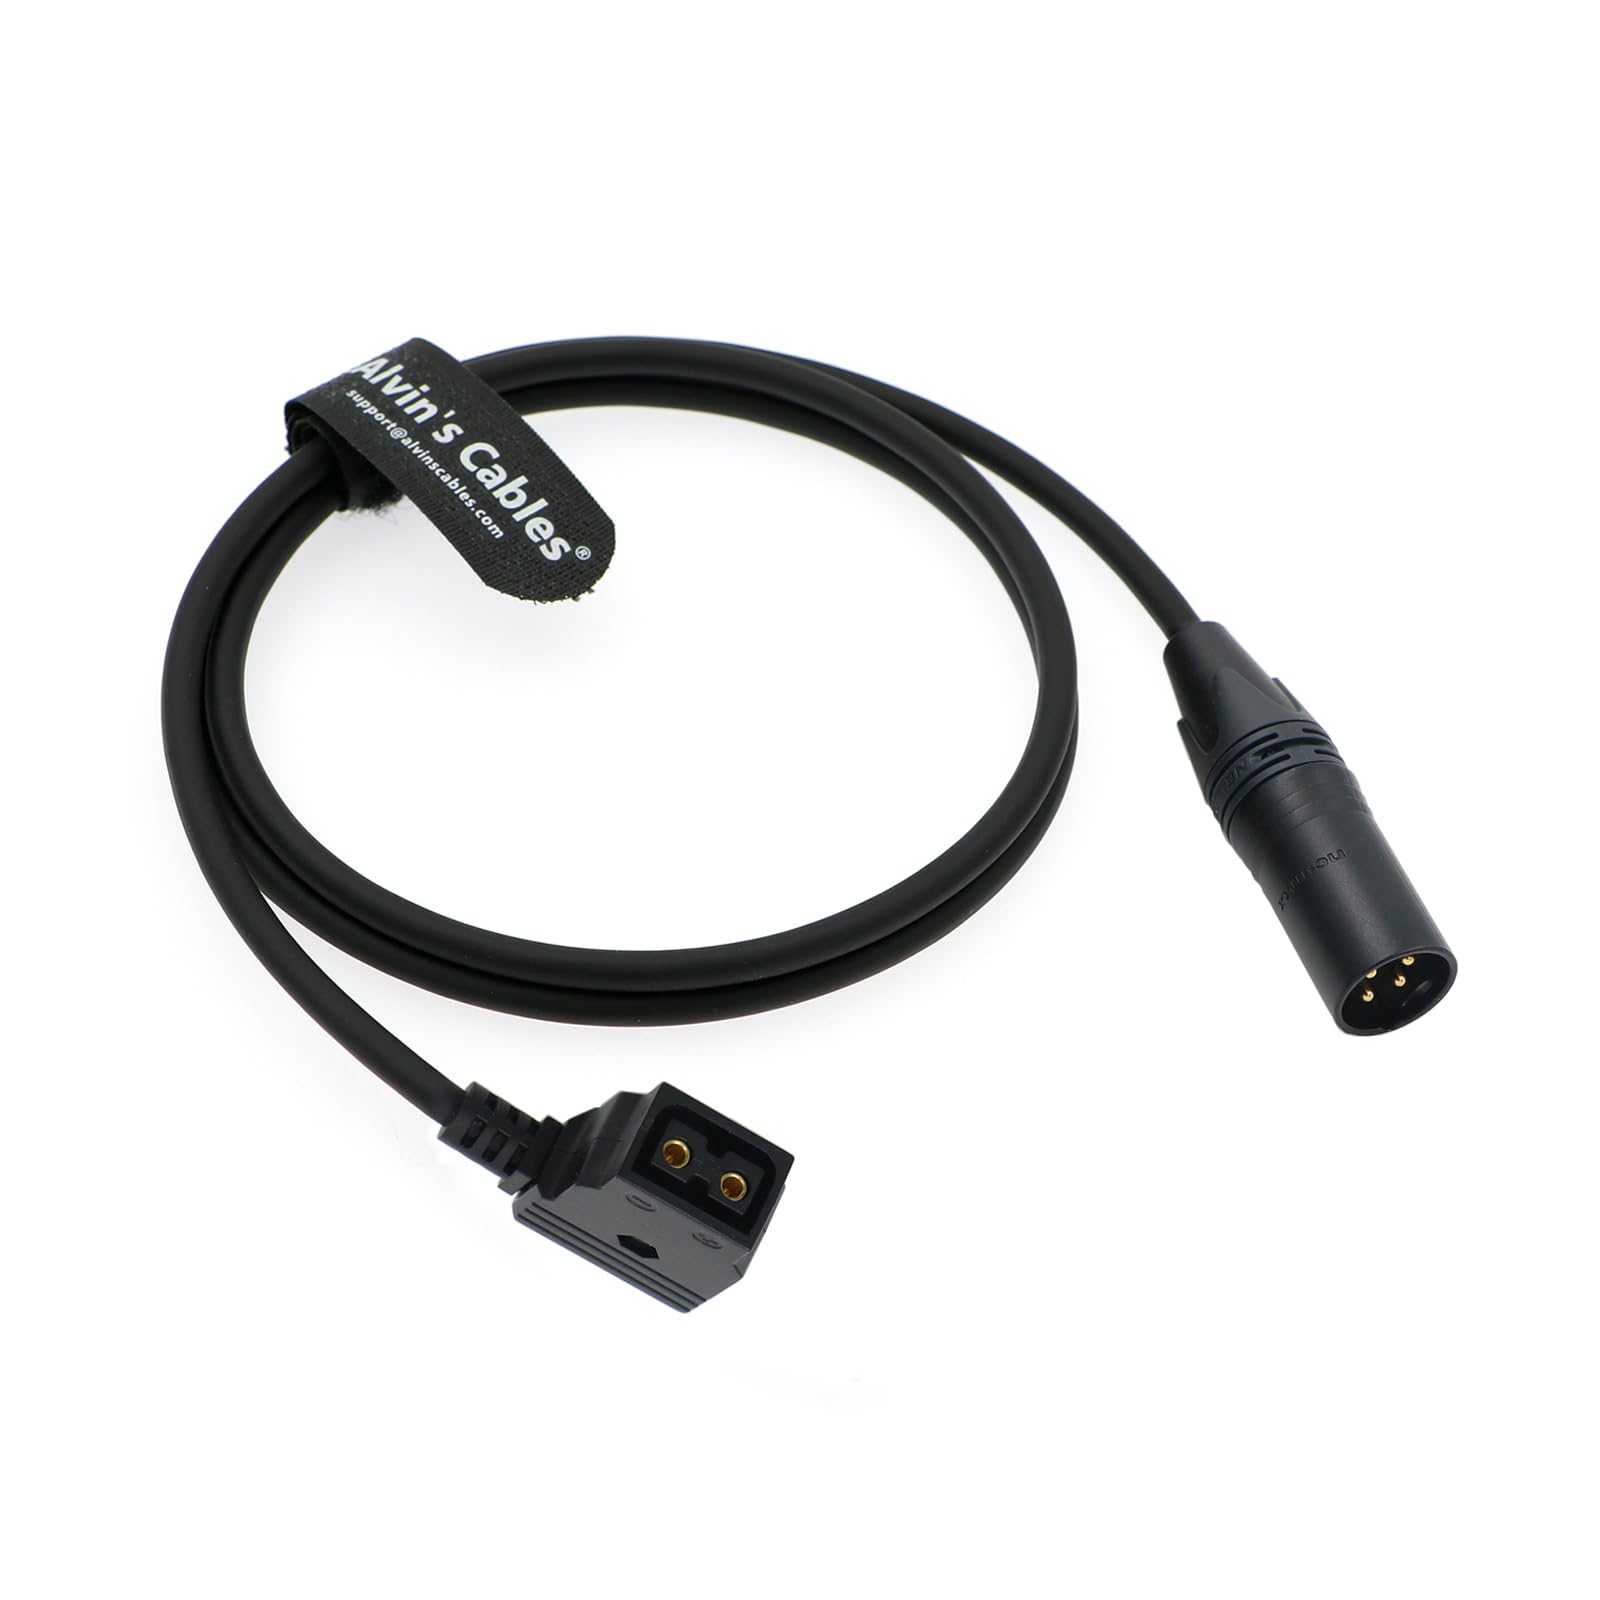 Alvin's Cables XLR 4 Pin Male to D-tap Female Power Cable Conversion Cable for Gold Mount V-Mount Battery 1M/39.4inches